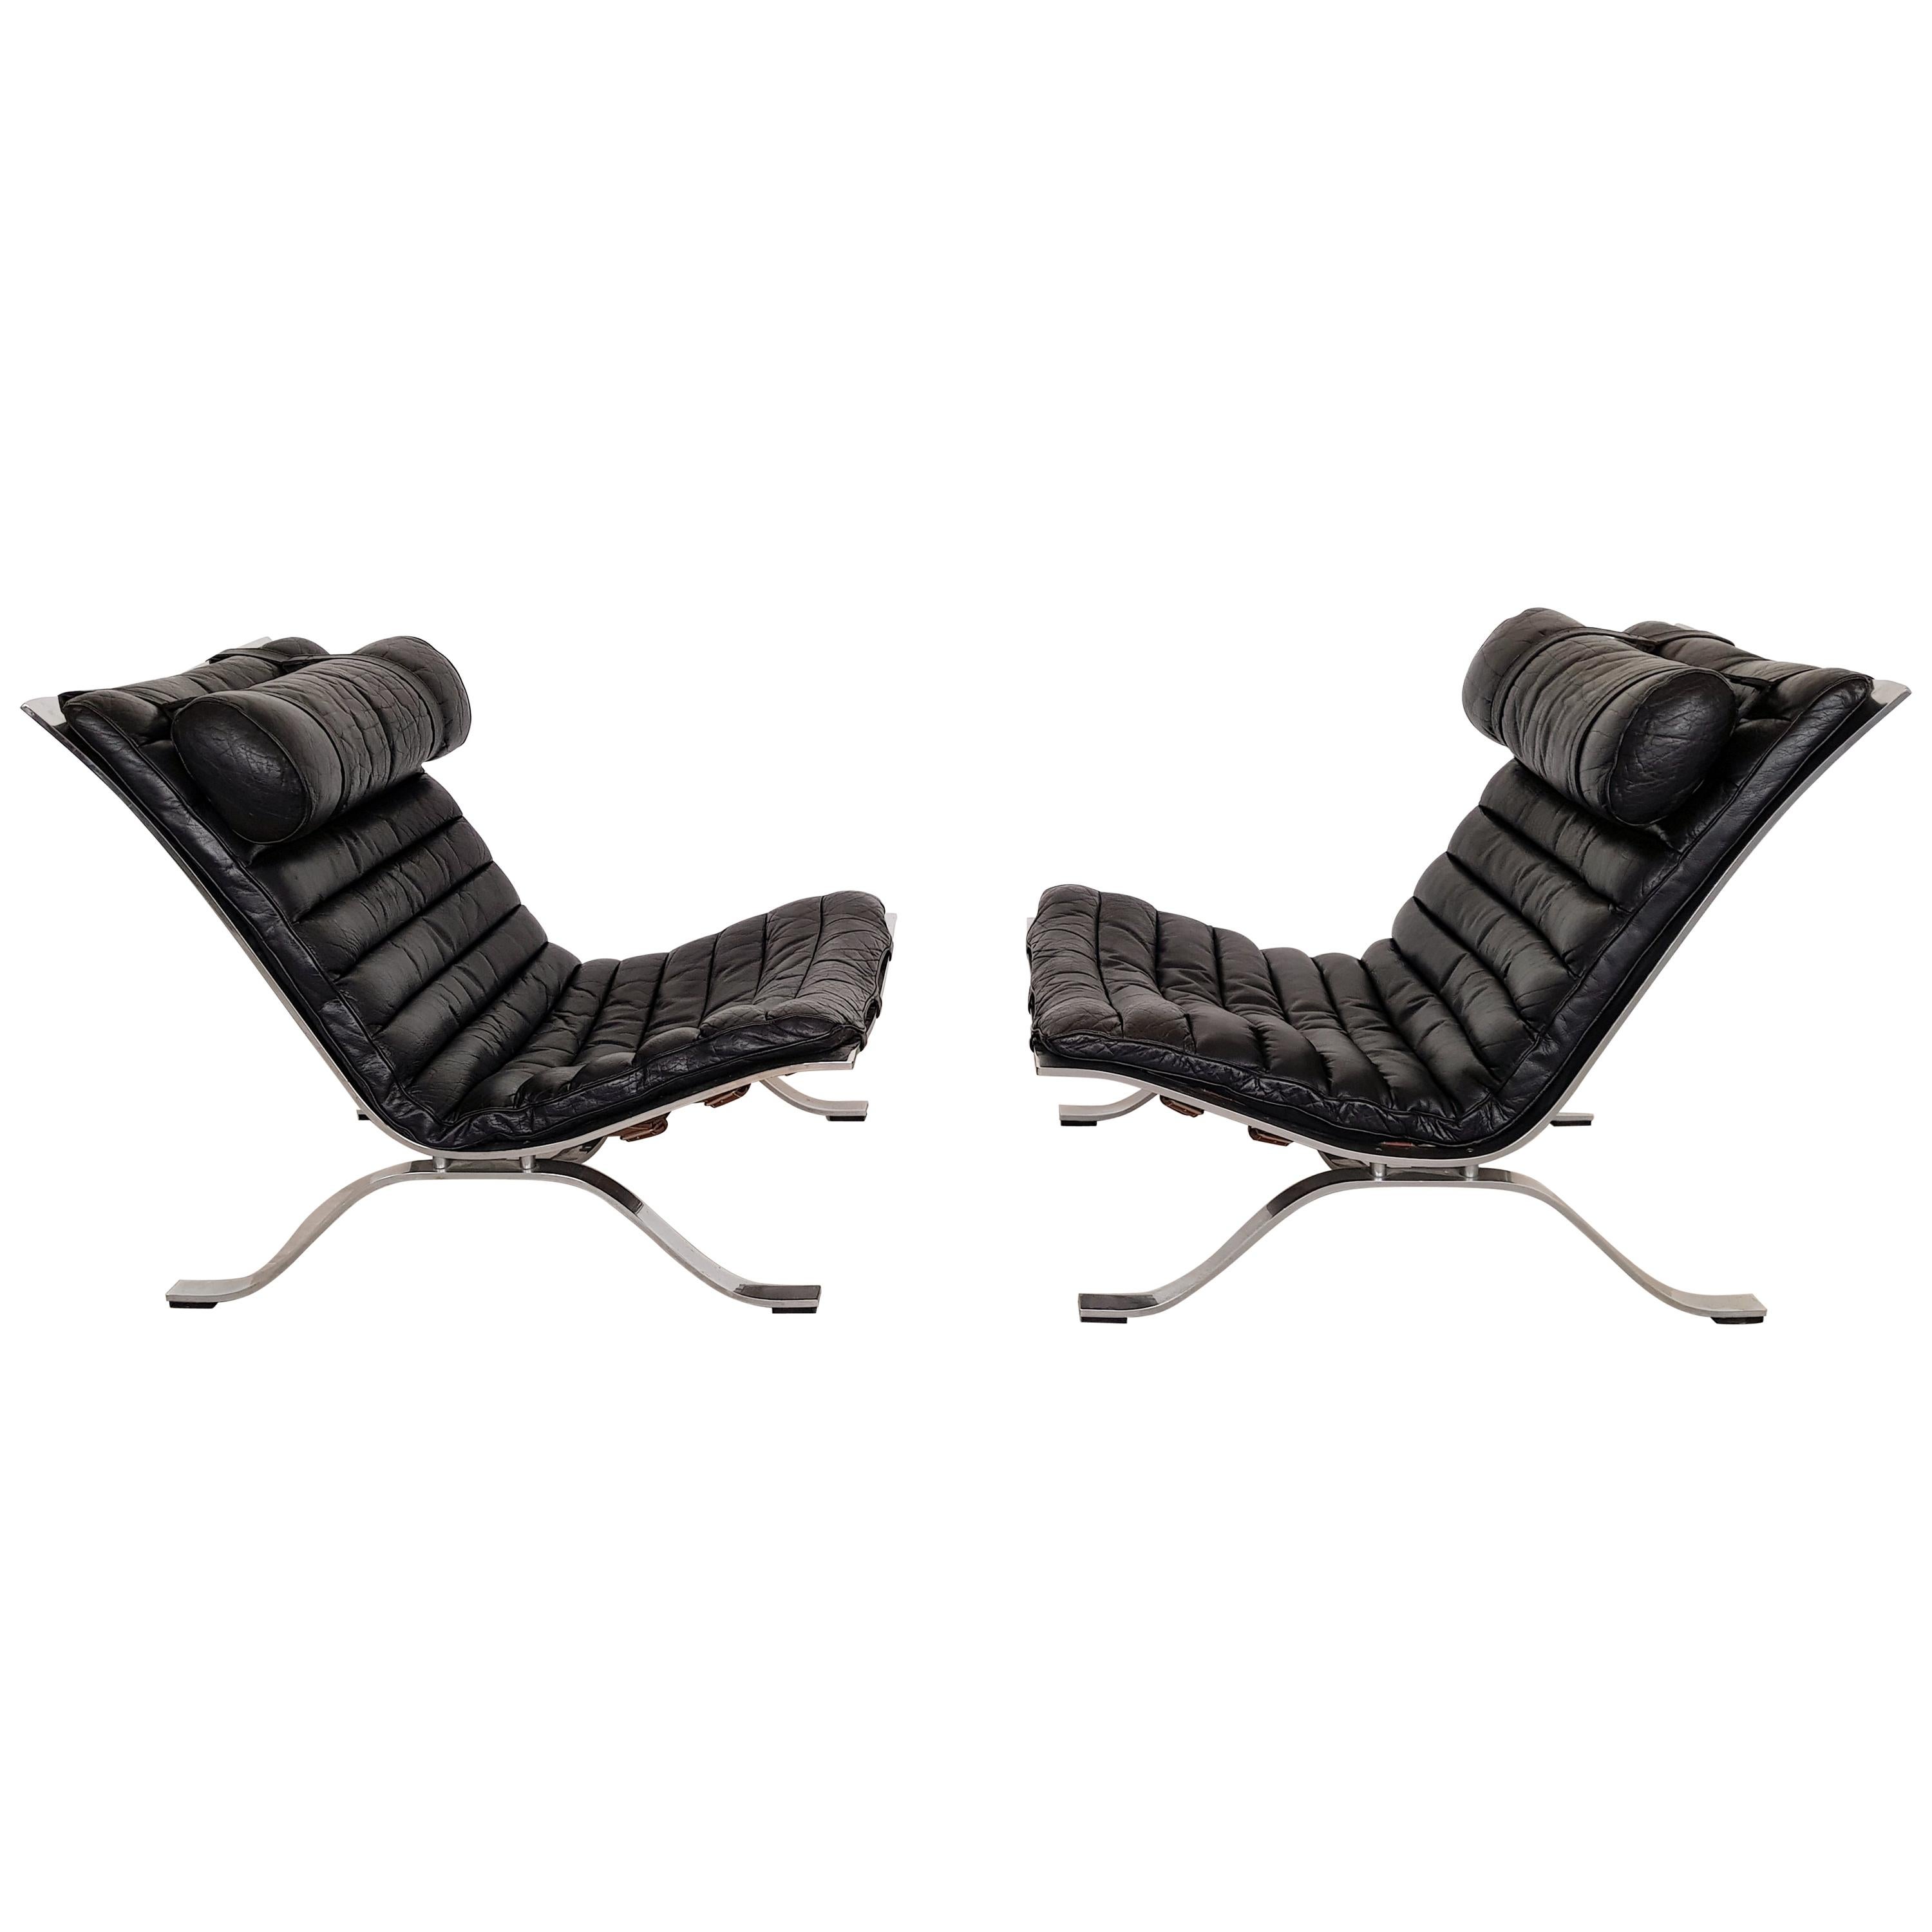 Black Leather Pair of Ari Lounge Chairs by Arne Norell